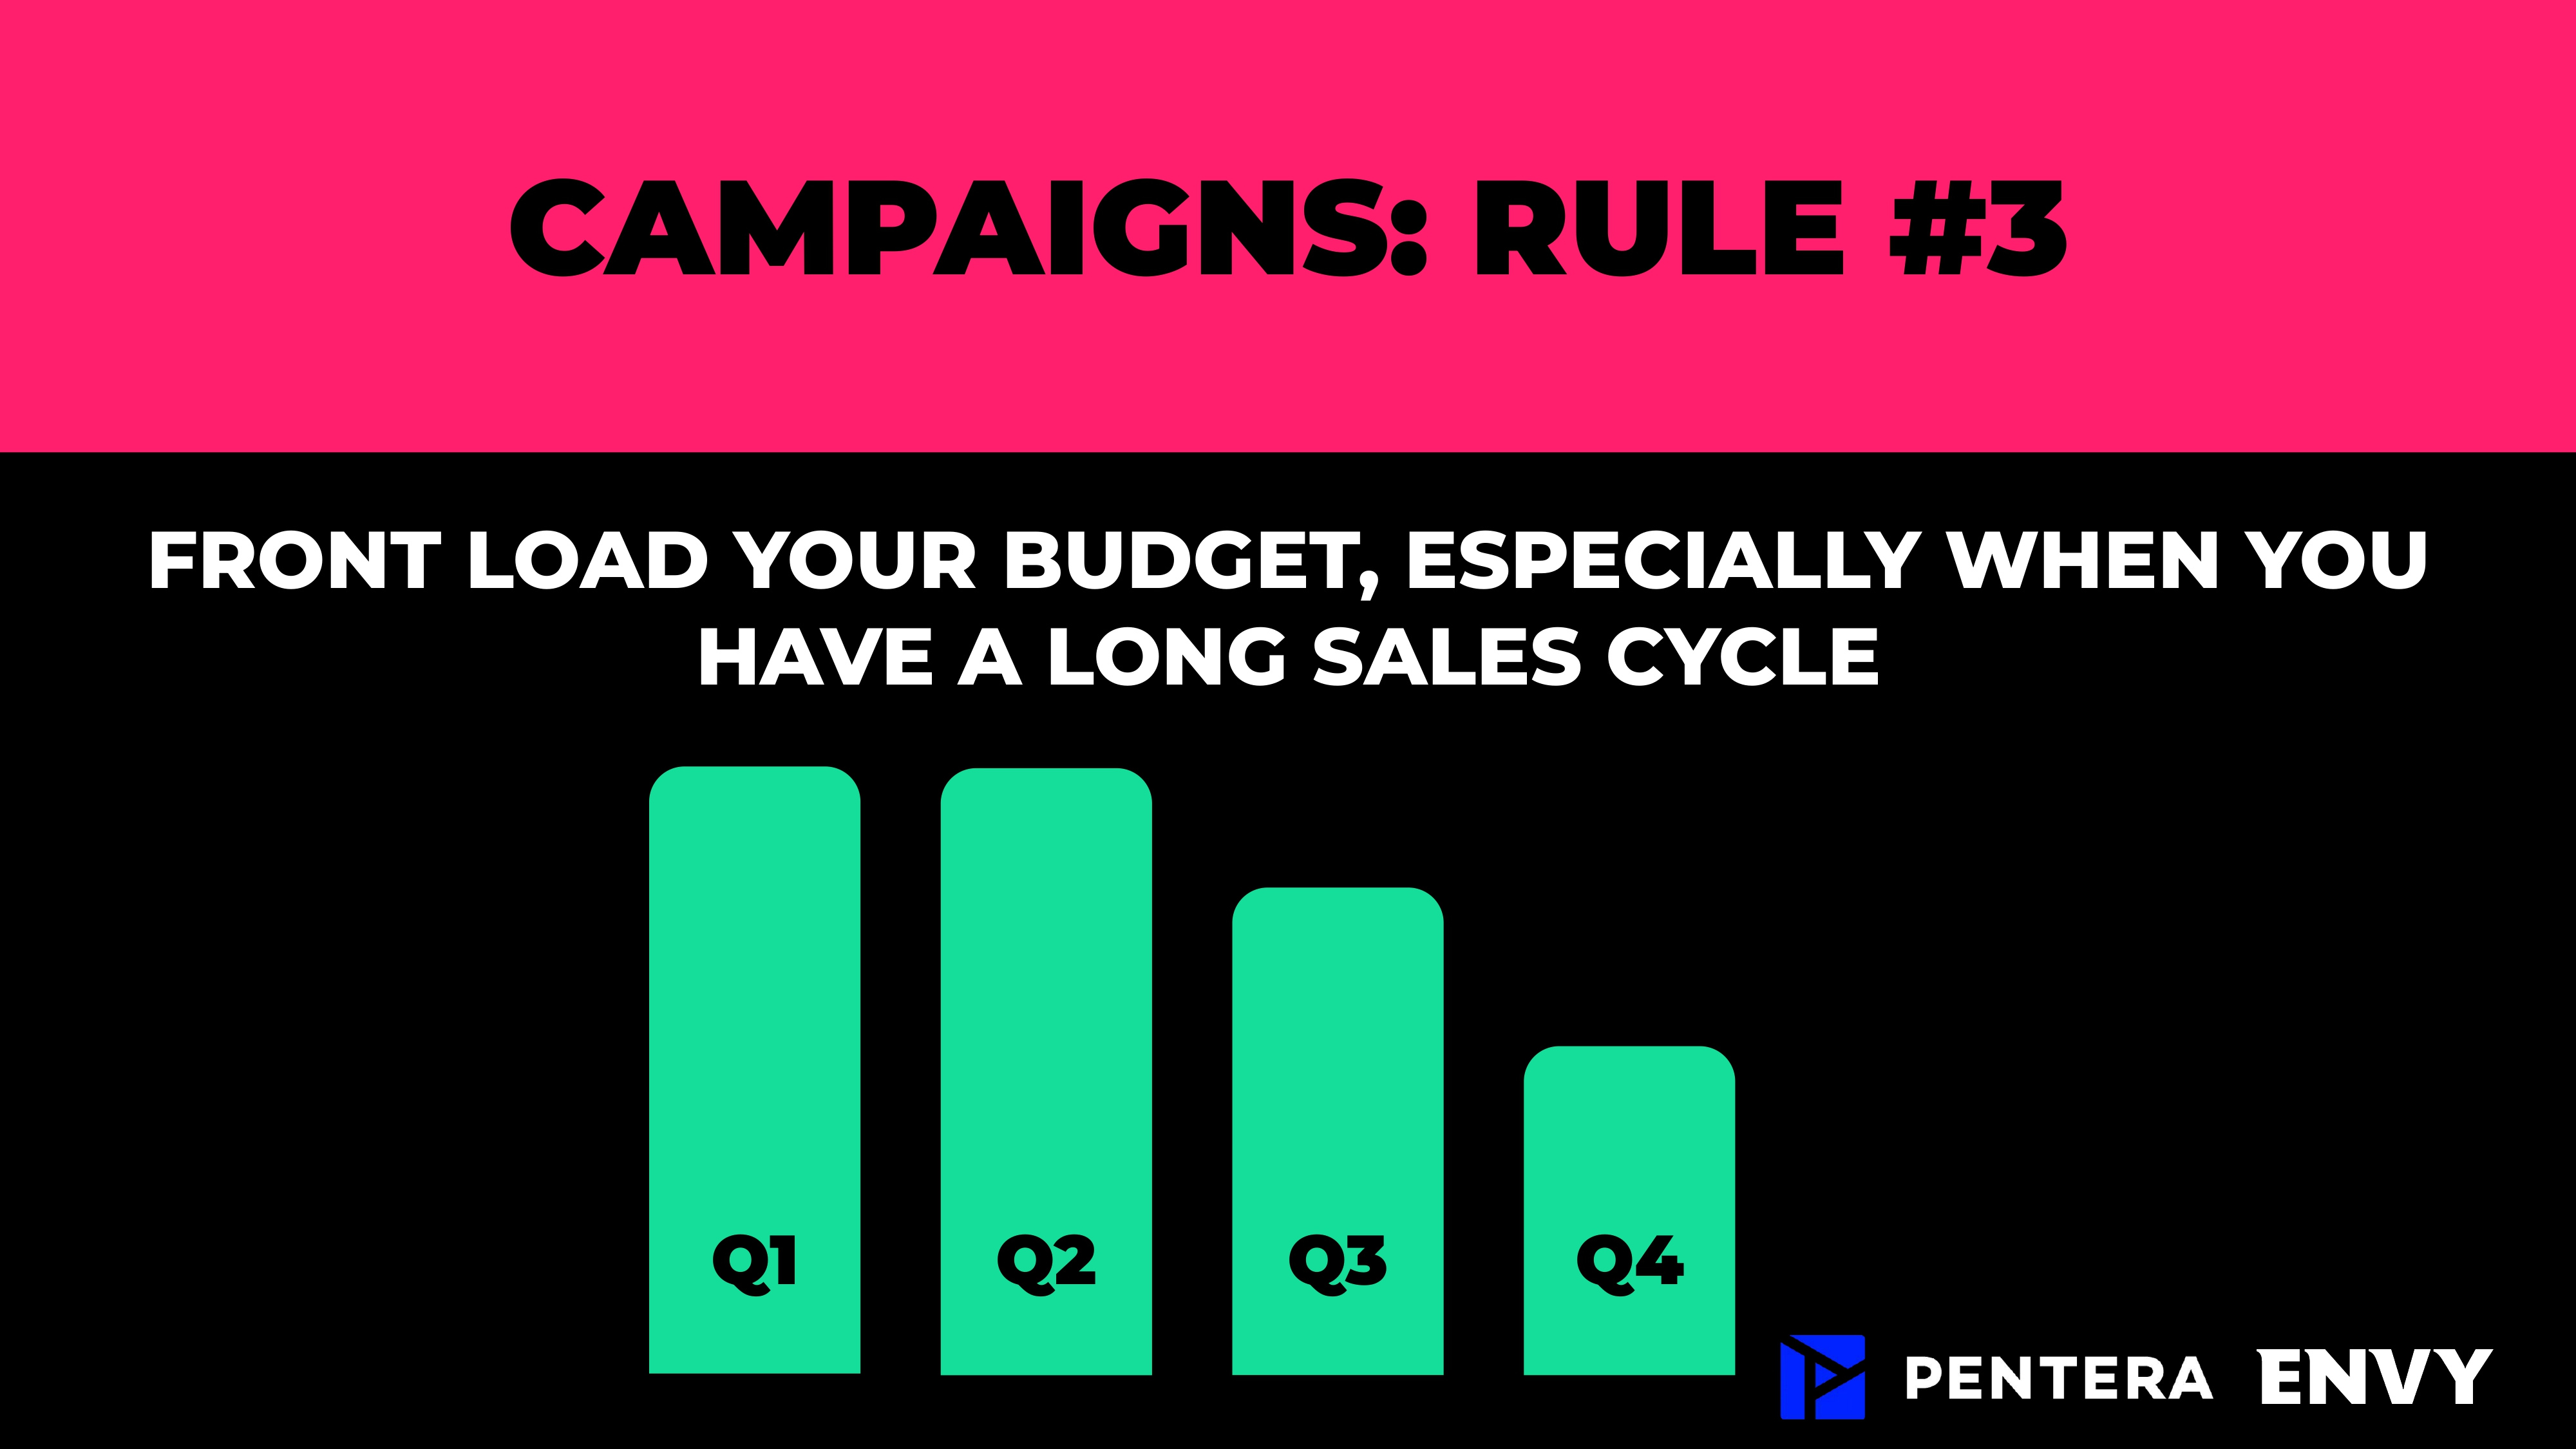 8 rules to rock your campaigns: Frontload your budget